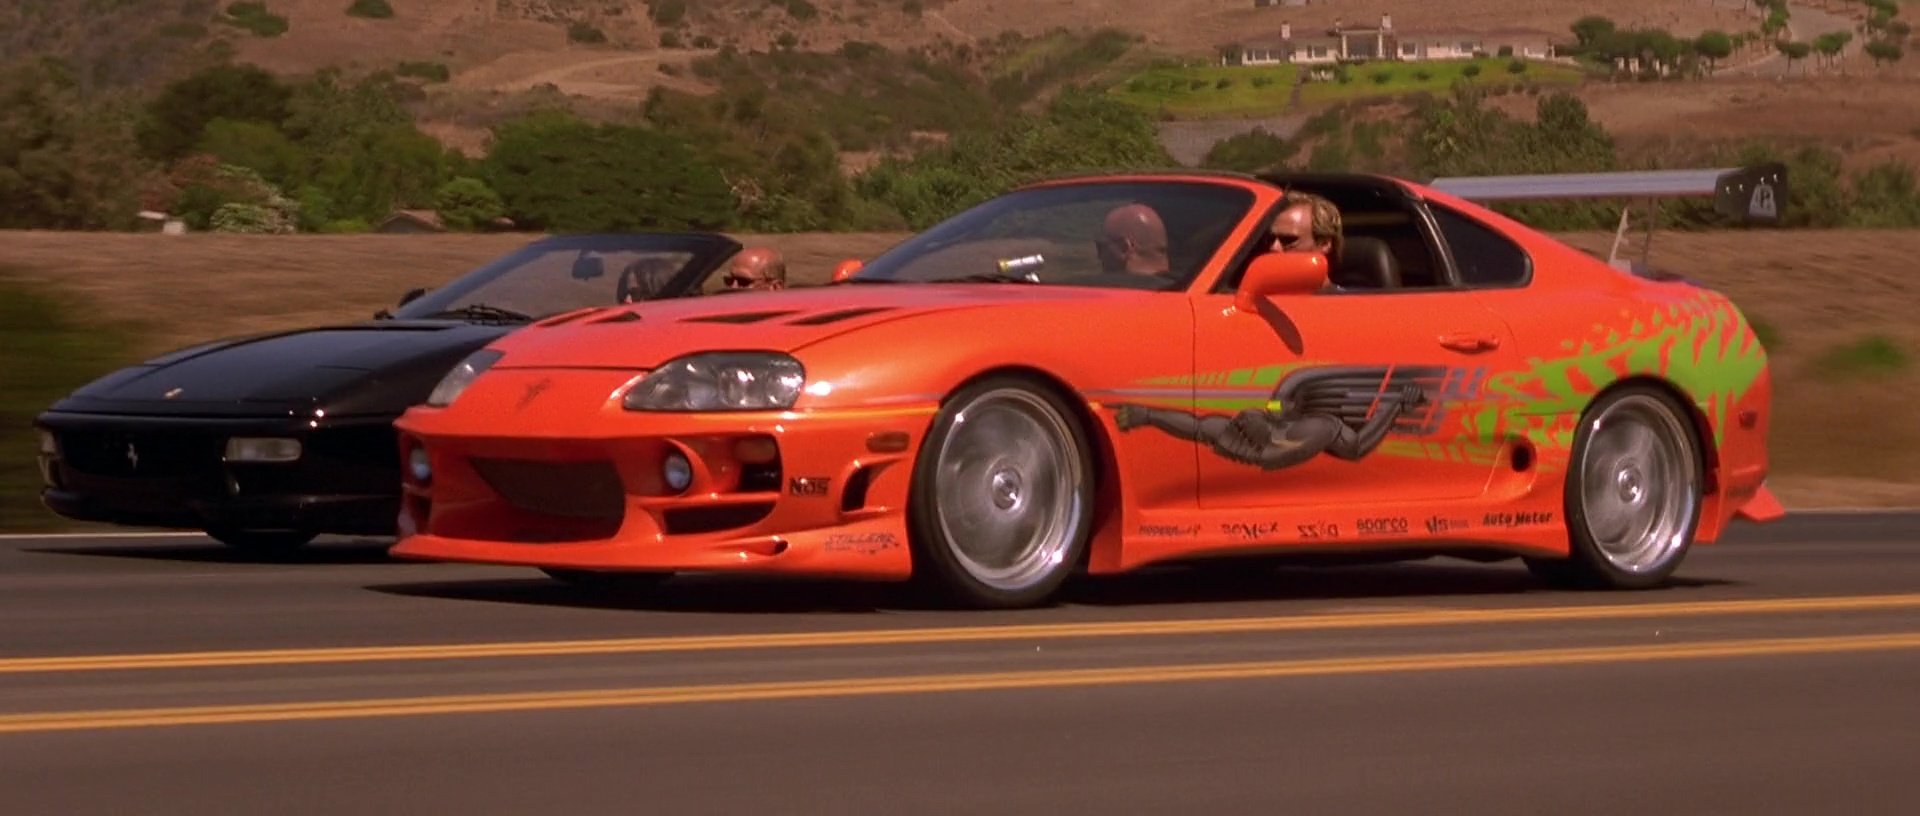 6 Famous Cars In Hollywood Movies